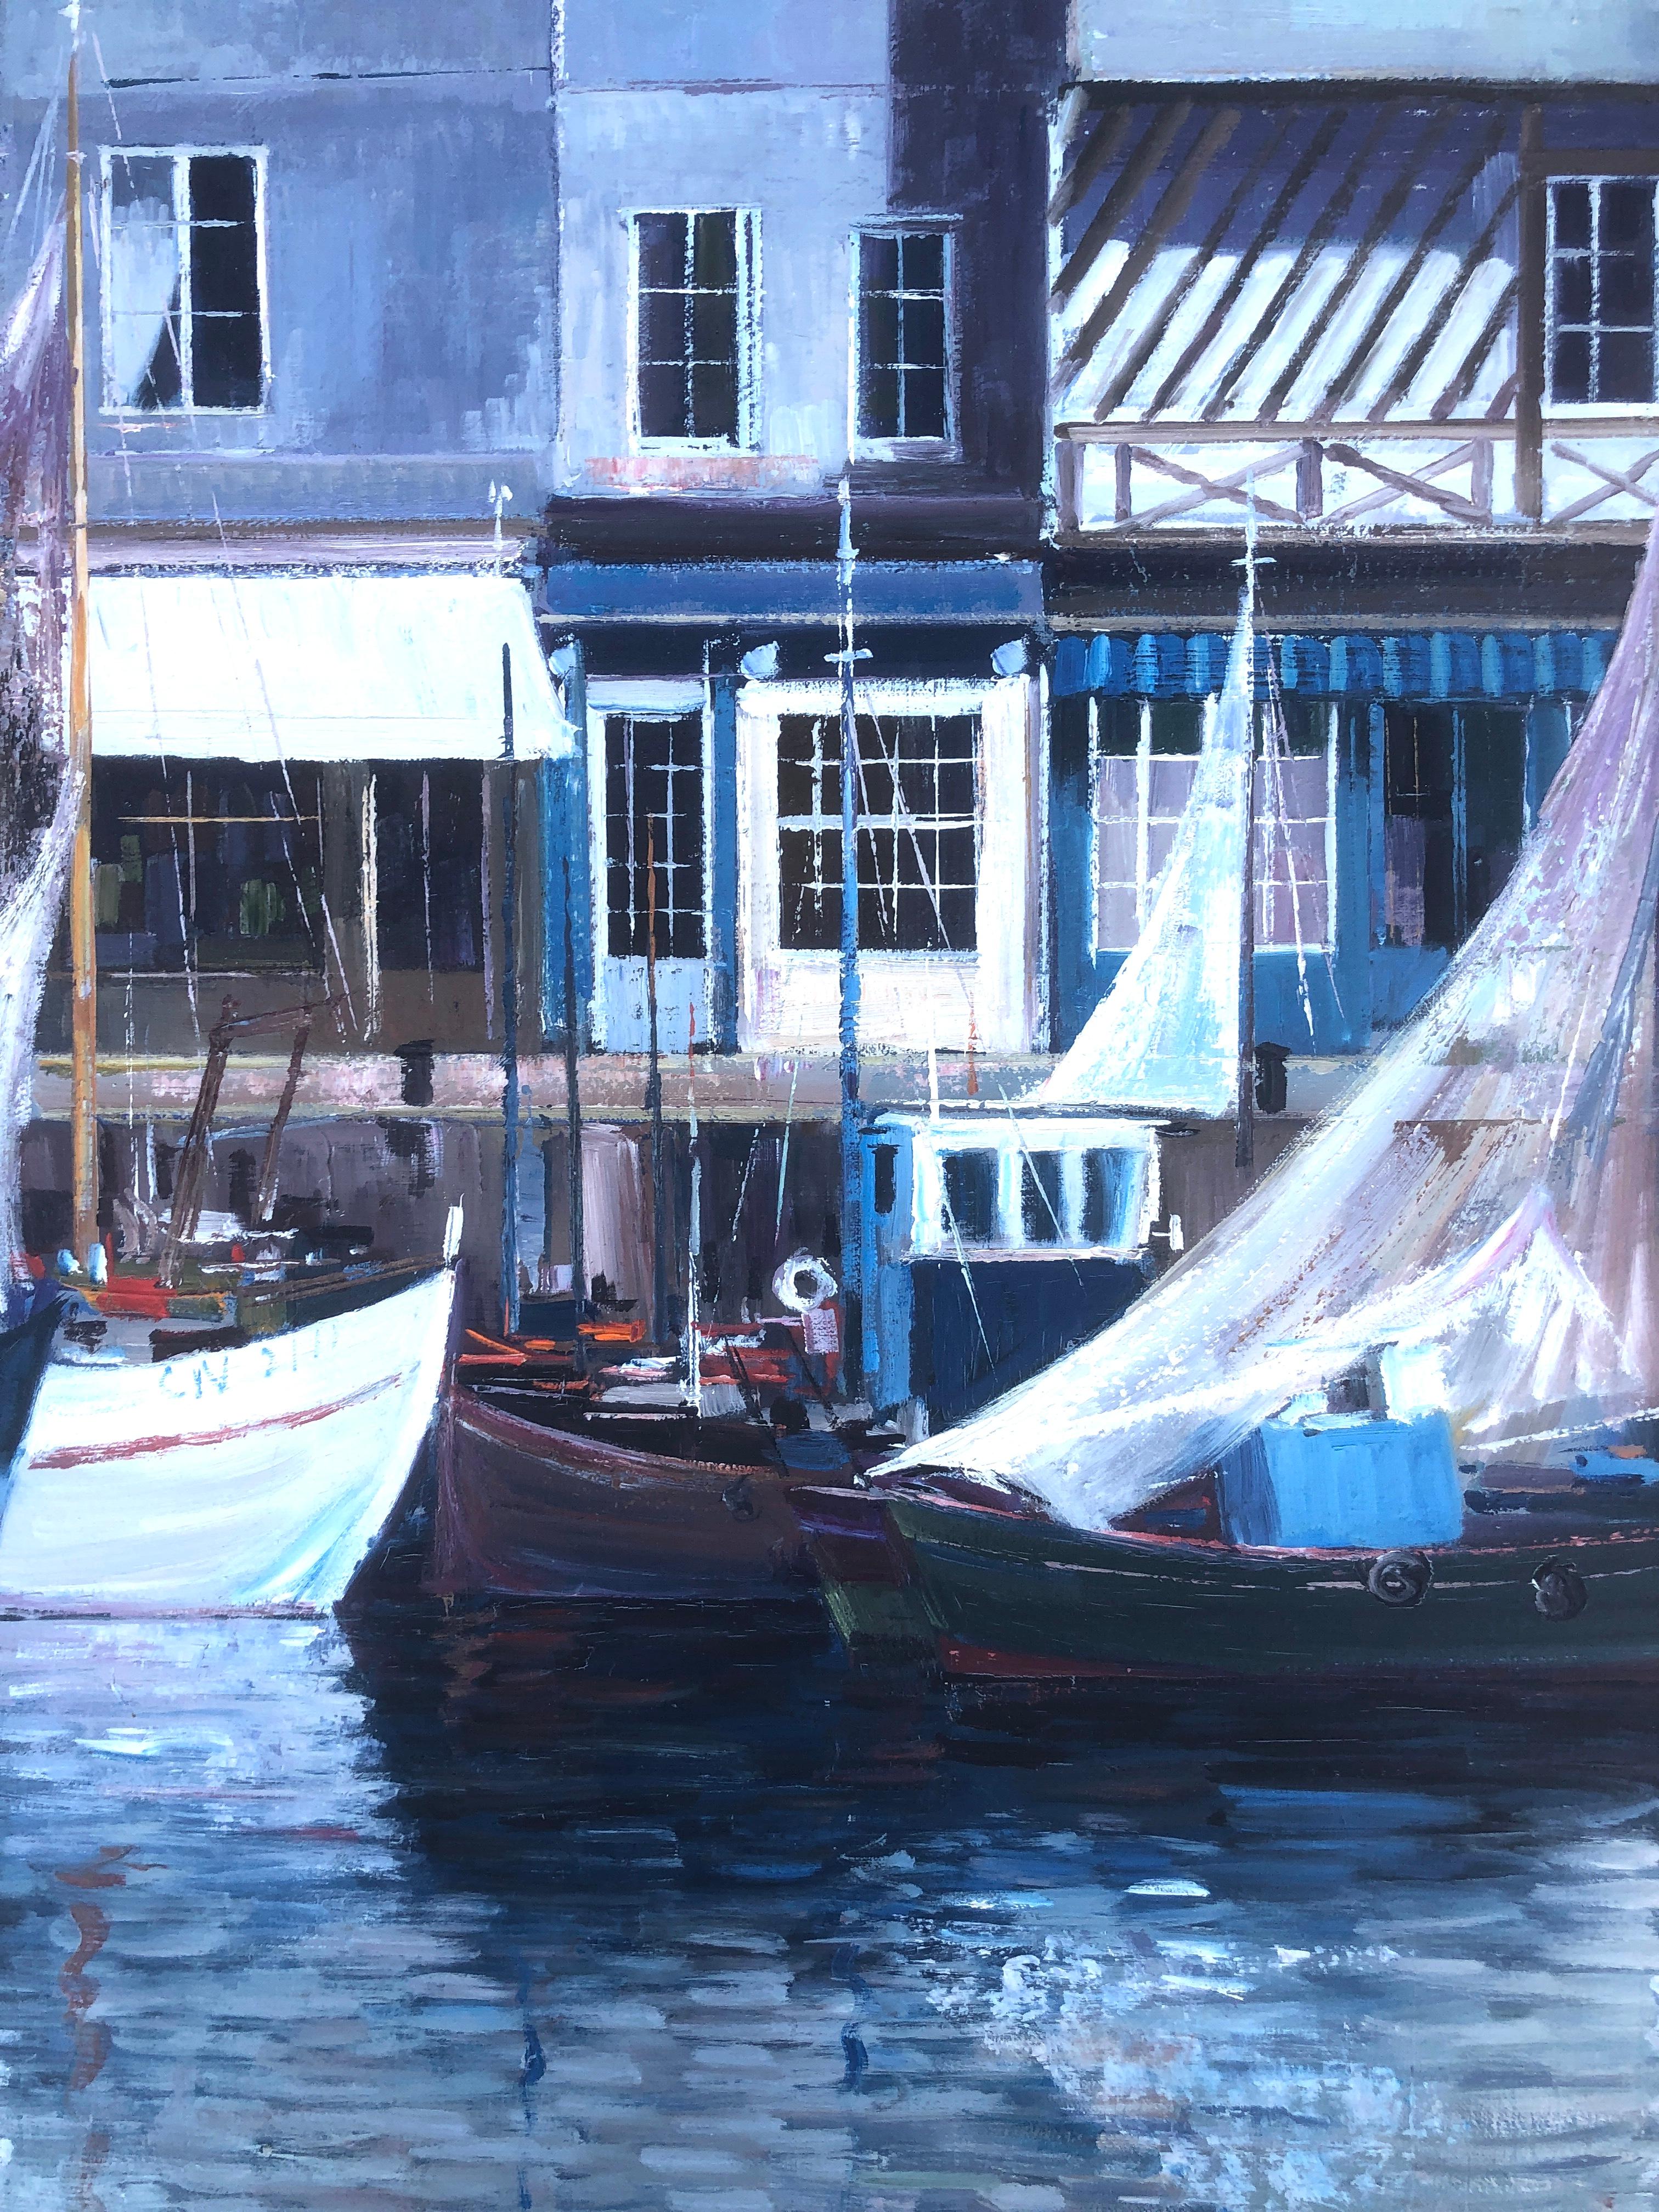 Josep Maria Vayreda Canadell (1932-2001) - Honfleur fishing port - Oil on canvas
Oil measures 46x38 cm.
Frame measures 66x58 cm.

Josep Maria Vayreda Canadell
Year of birth: 1932
Biography:
Member of a family spanish saga of artists, which